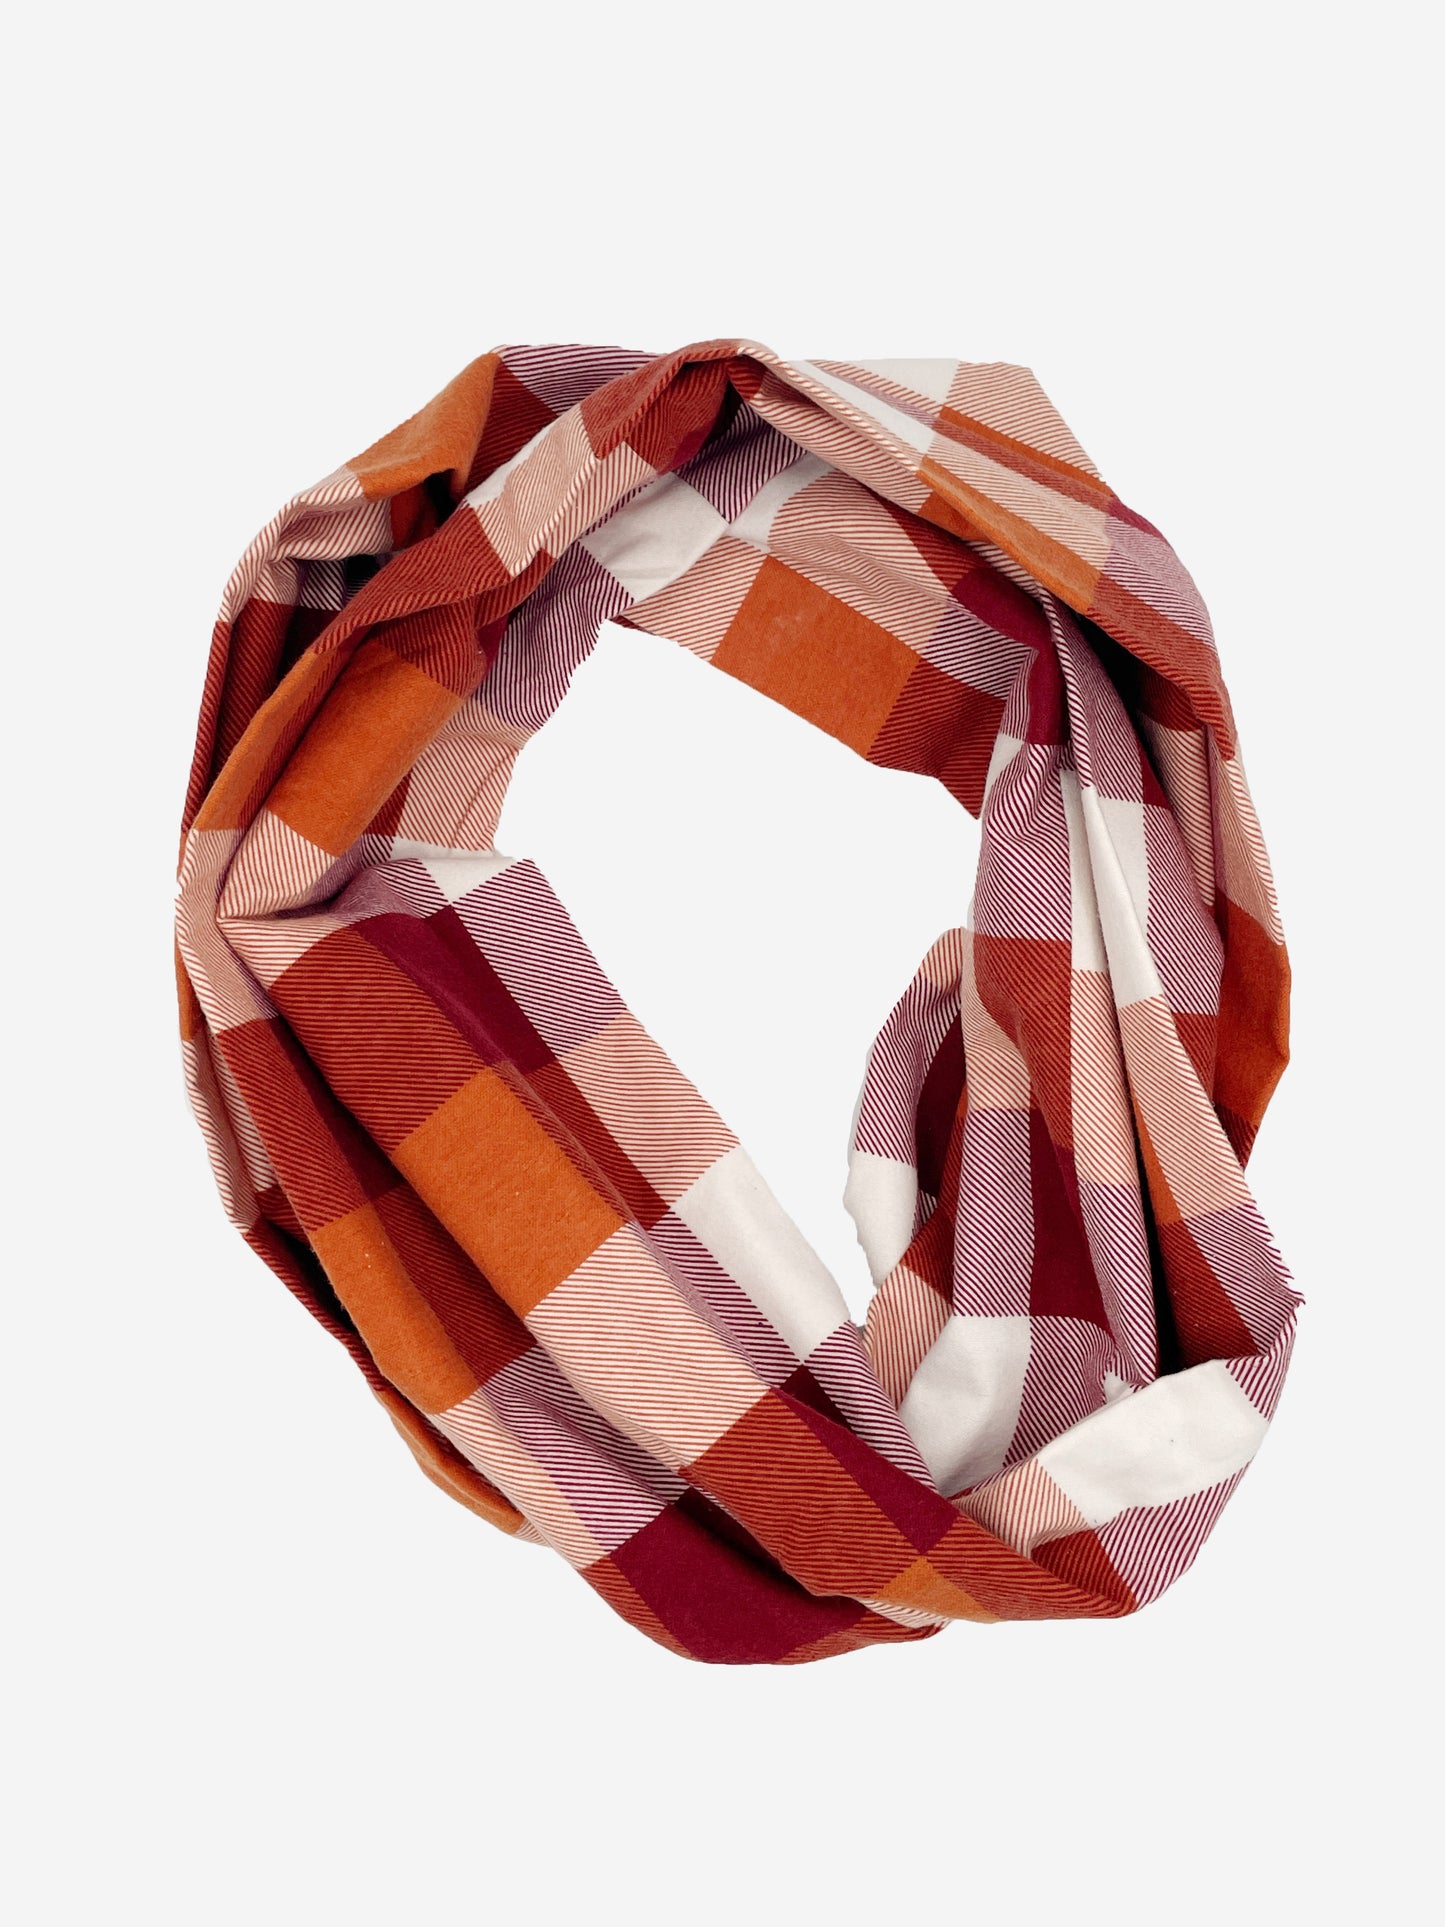 Rustic Red Flannel Infinity Scarf